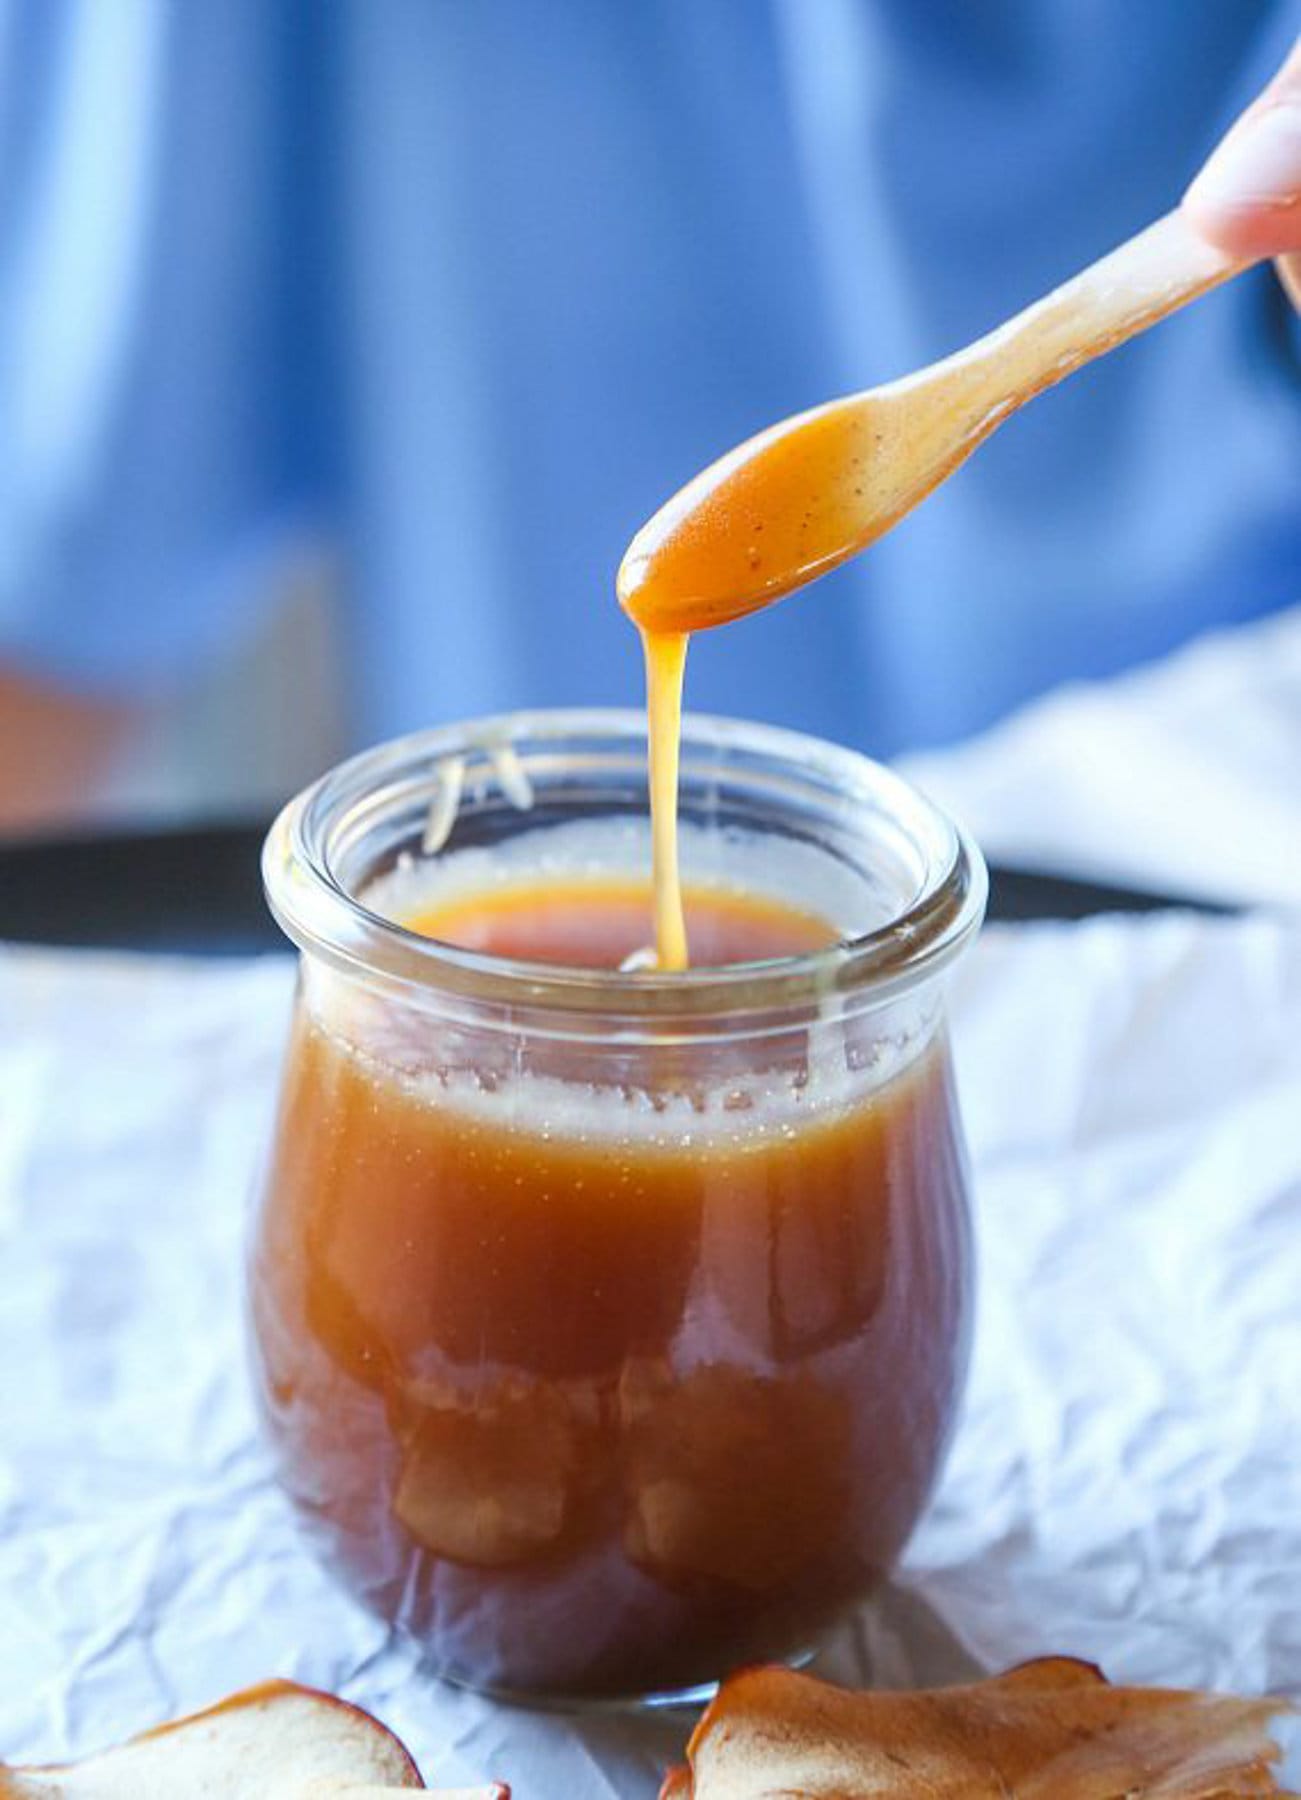 Apple cider caramel glaze drizzled into a cup